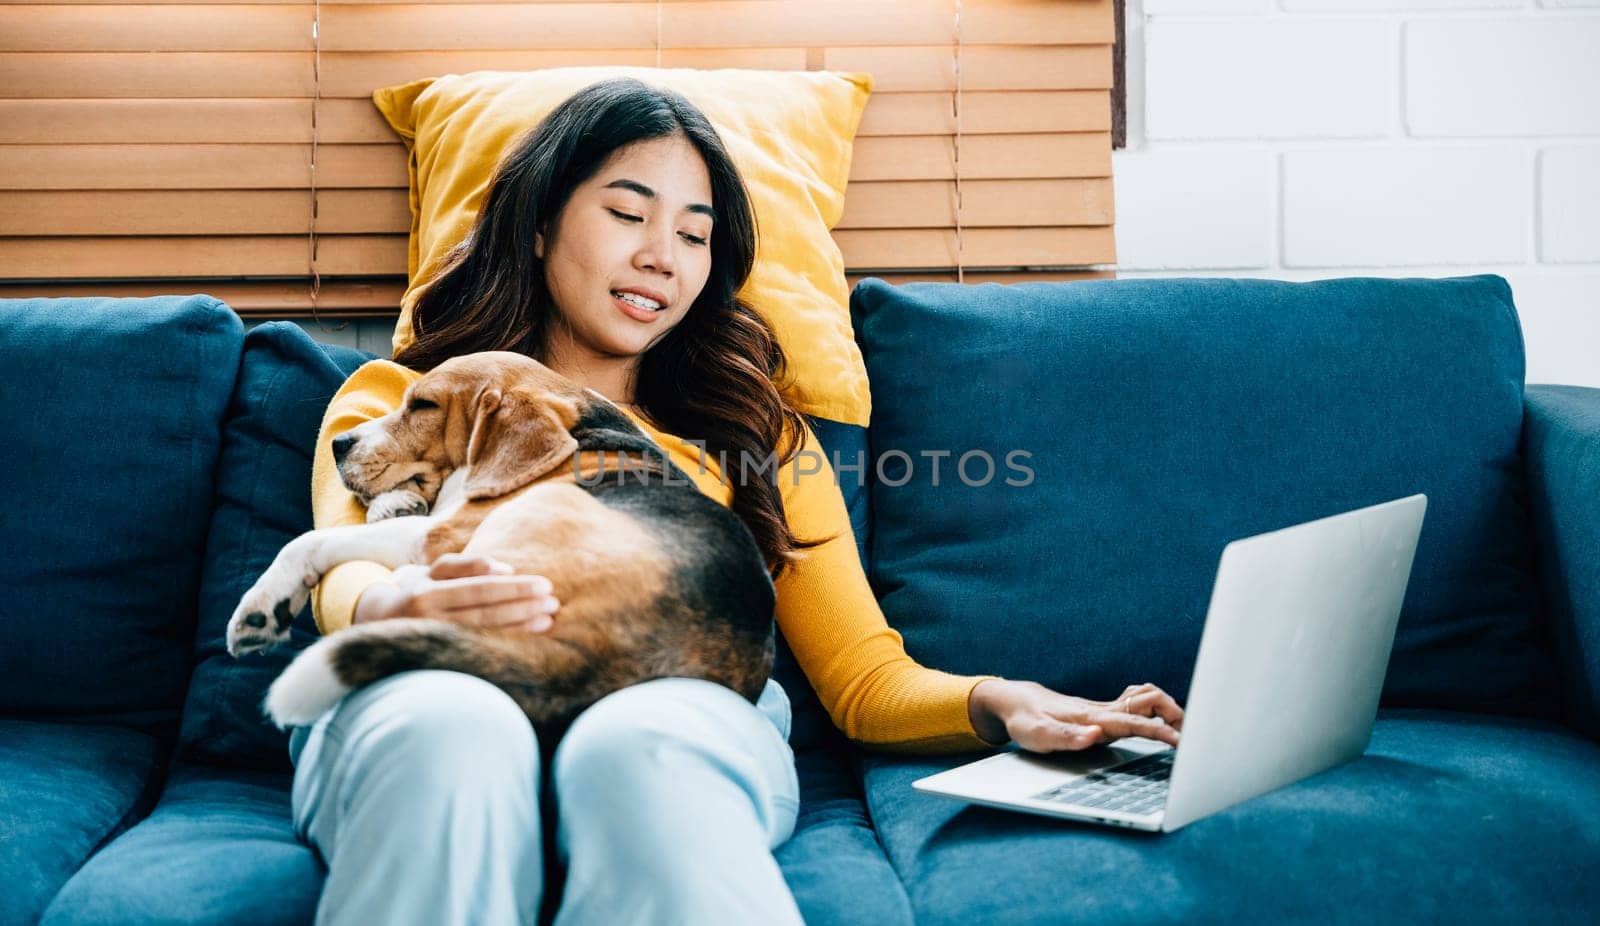 A pretty young woman, working on her laptop at home on the sofa, smiles as her loyal Beagle dog sleeps beside her. Their friendly bond and togetherness make working from home a joy. Friendly Dog. by Sorapop